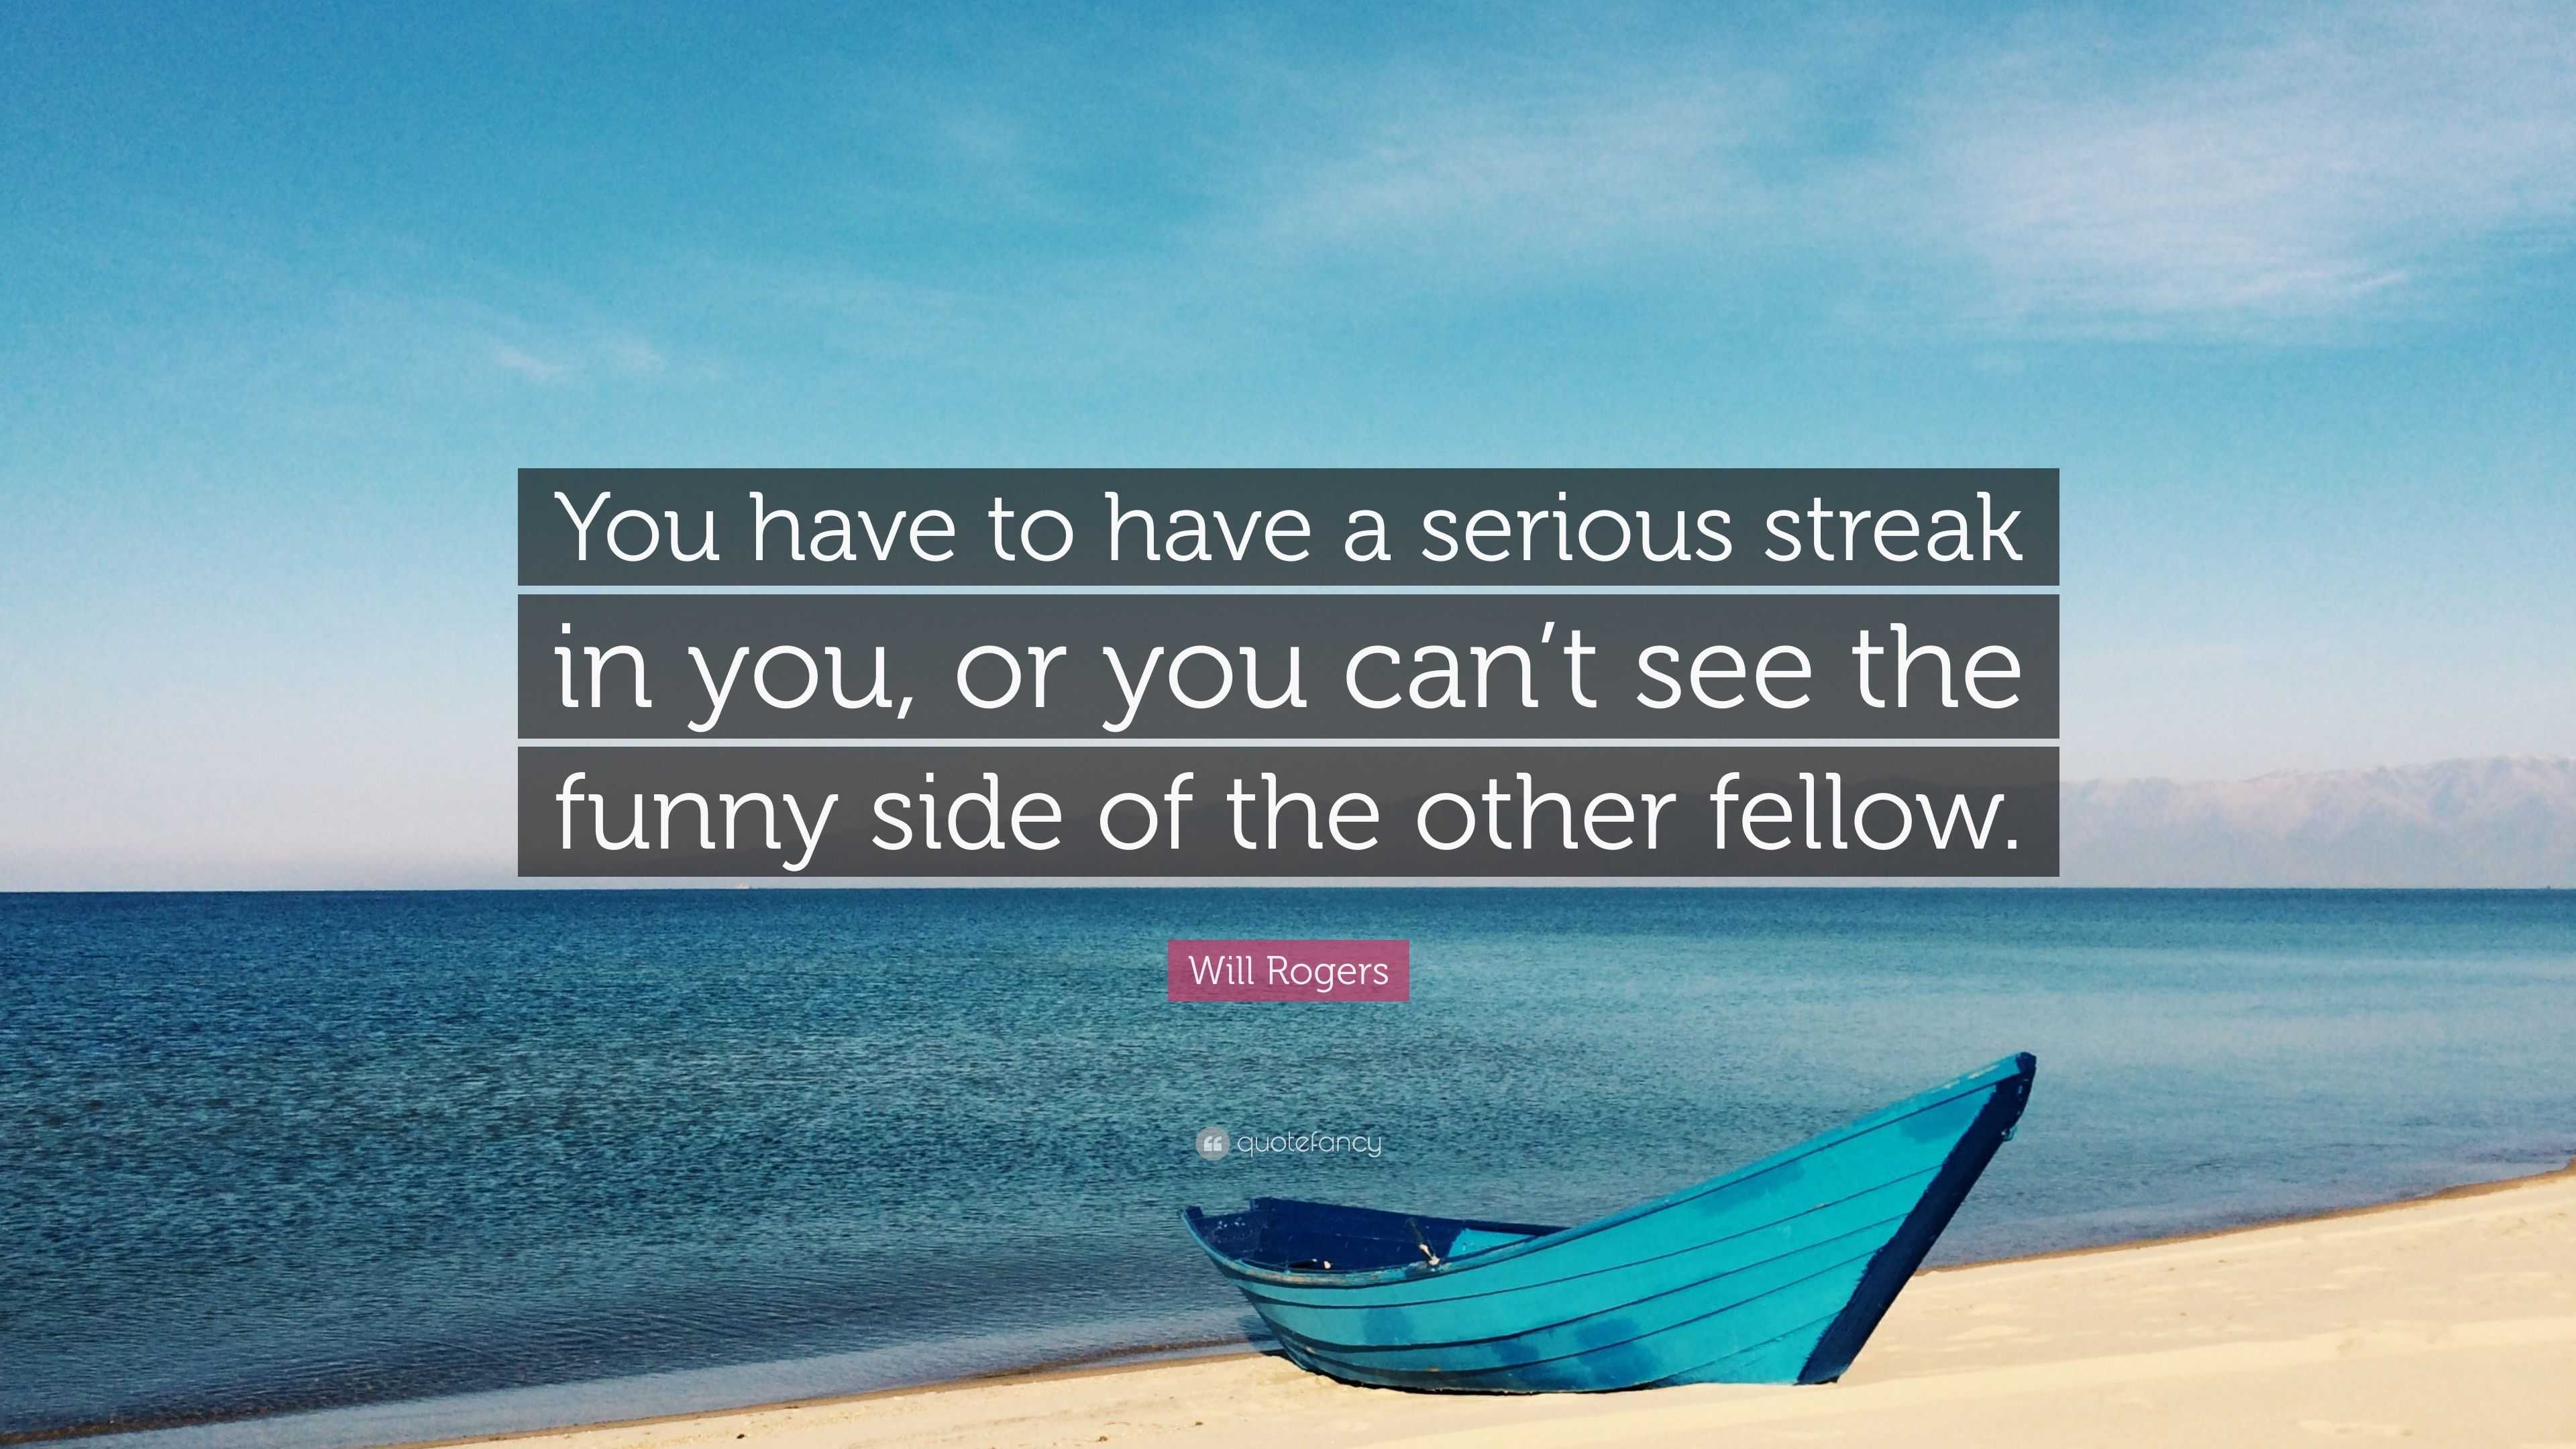 Will Rogers Quote: “You have to have a serious streak in you, or you can't